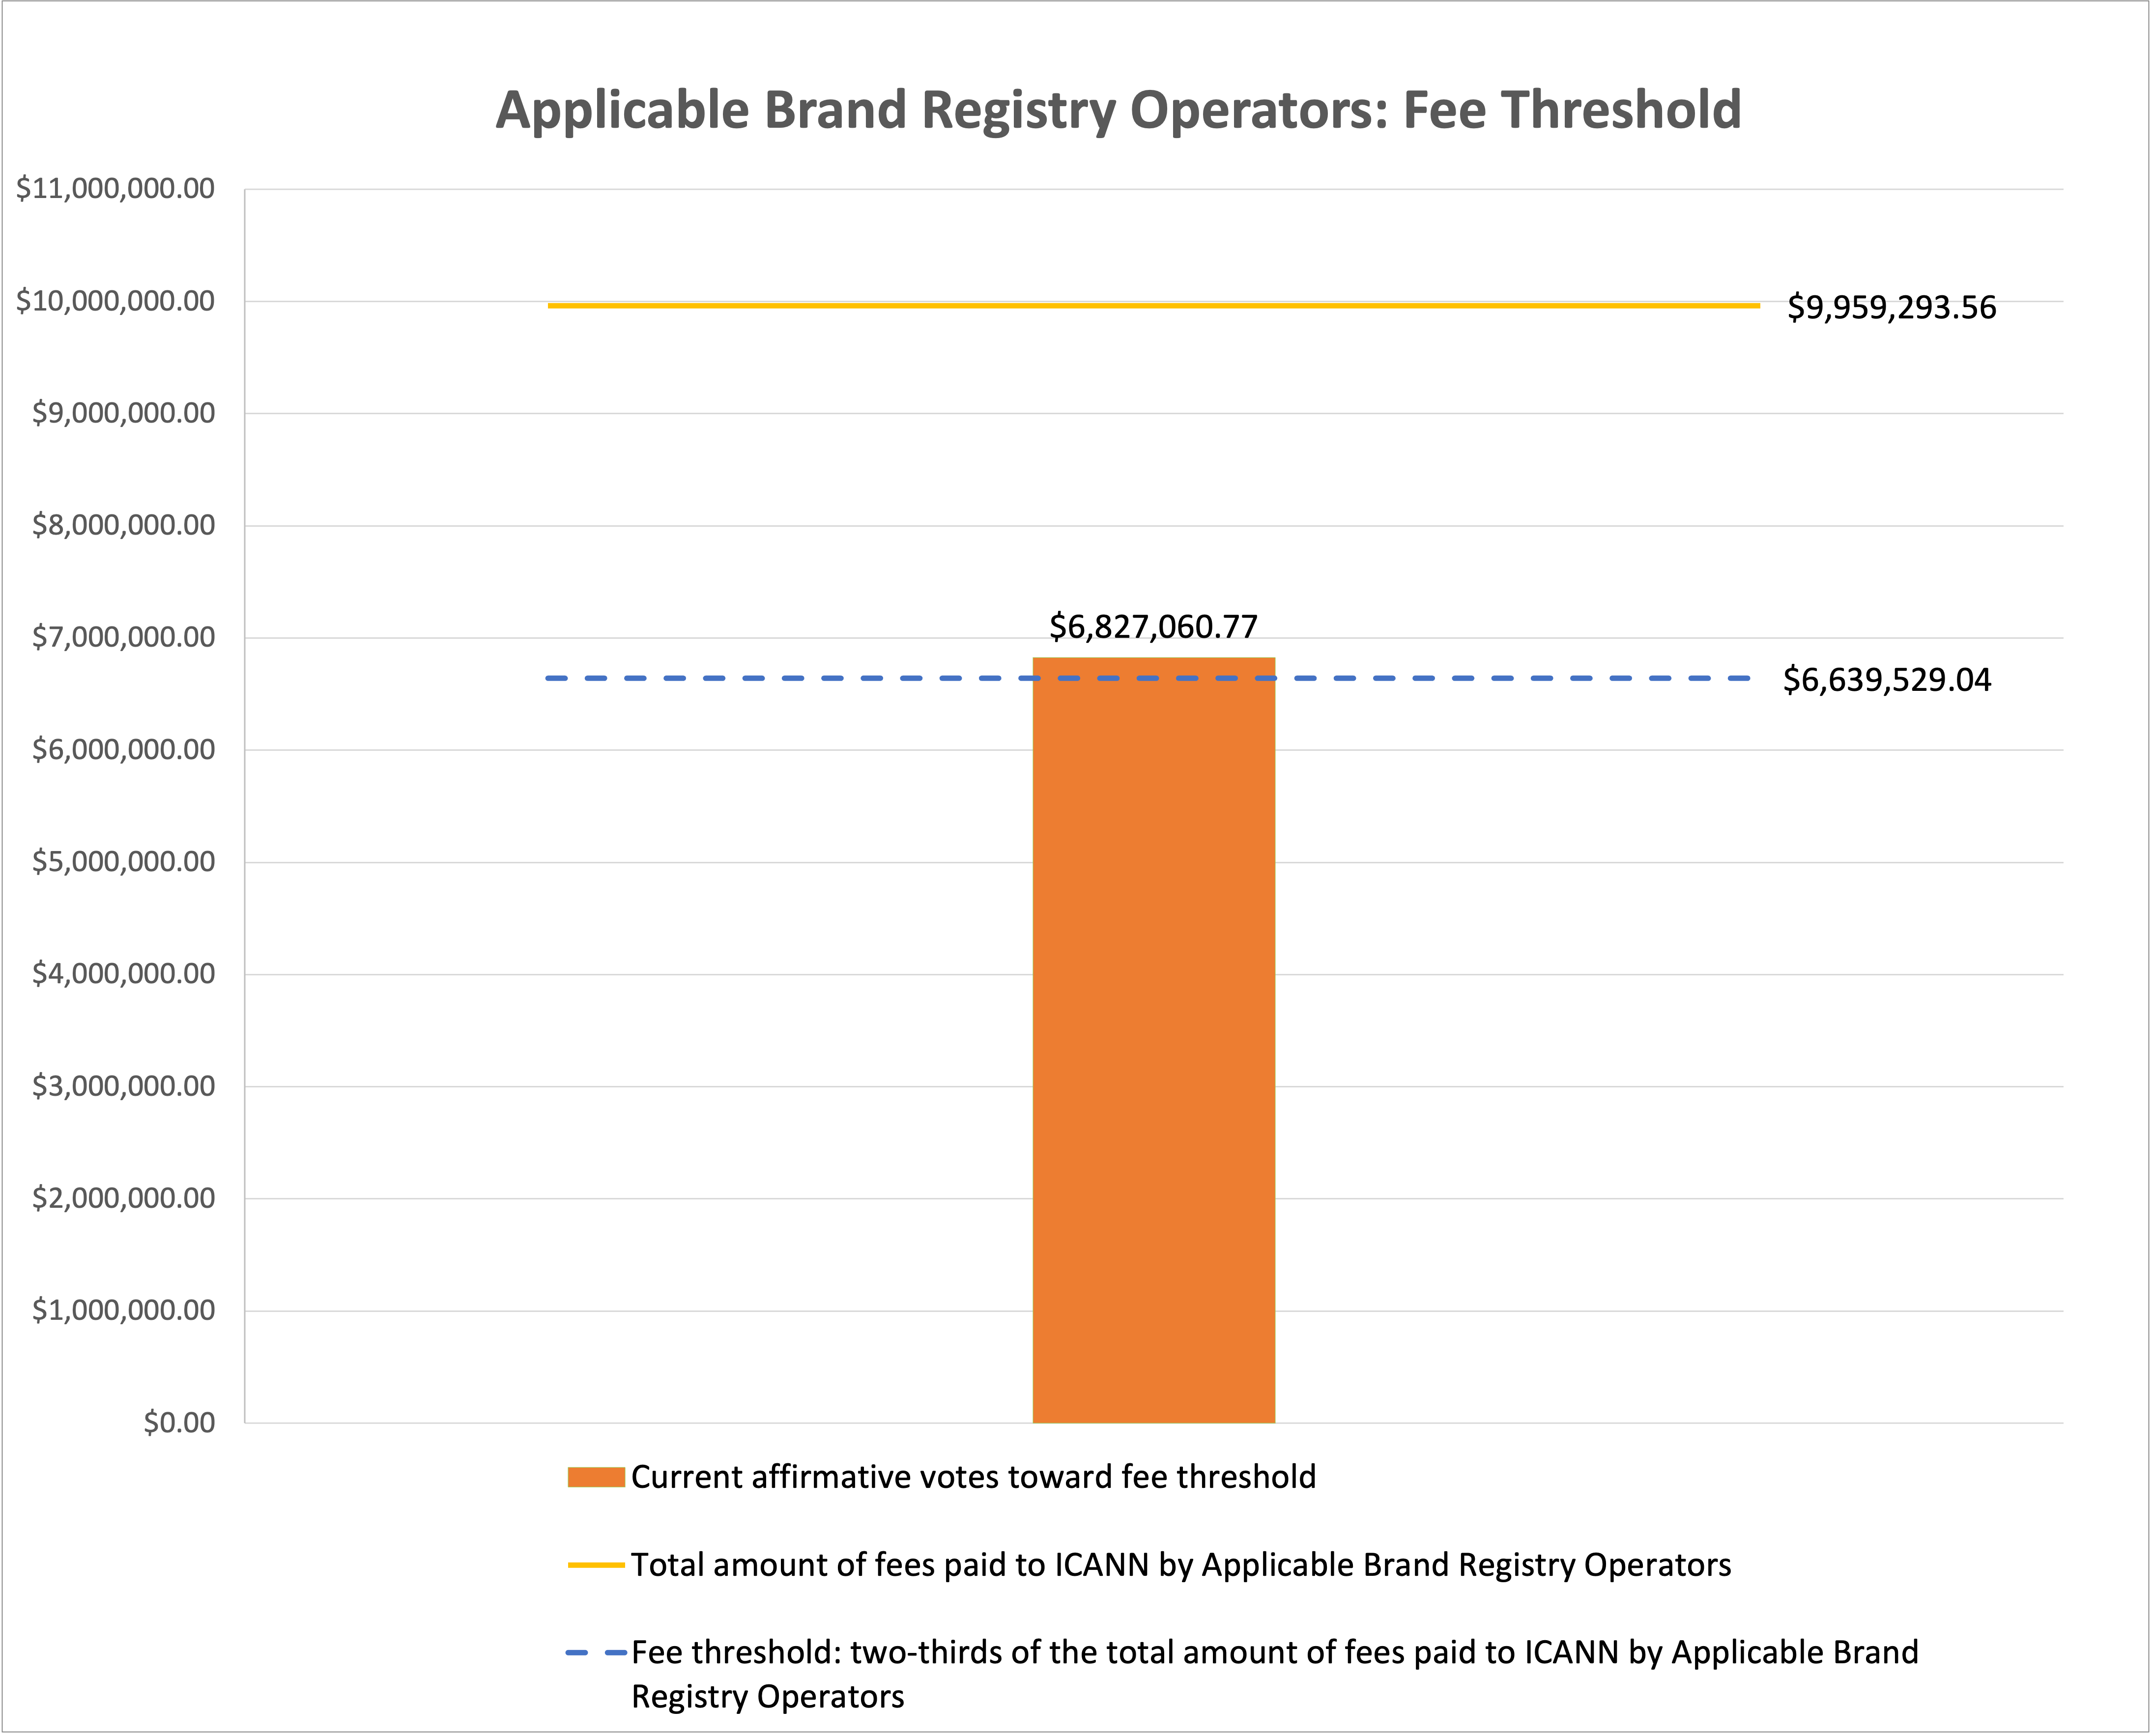 Bar chart of the progress of the vote towards the affirmative approval of the fee threshold for Applicable Brand Registry Operators. Fee approval threshold of $6,639,529.04, with current affirmative votes toward the fee threshold at $6,827,060.77